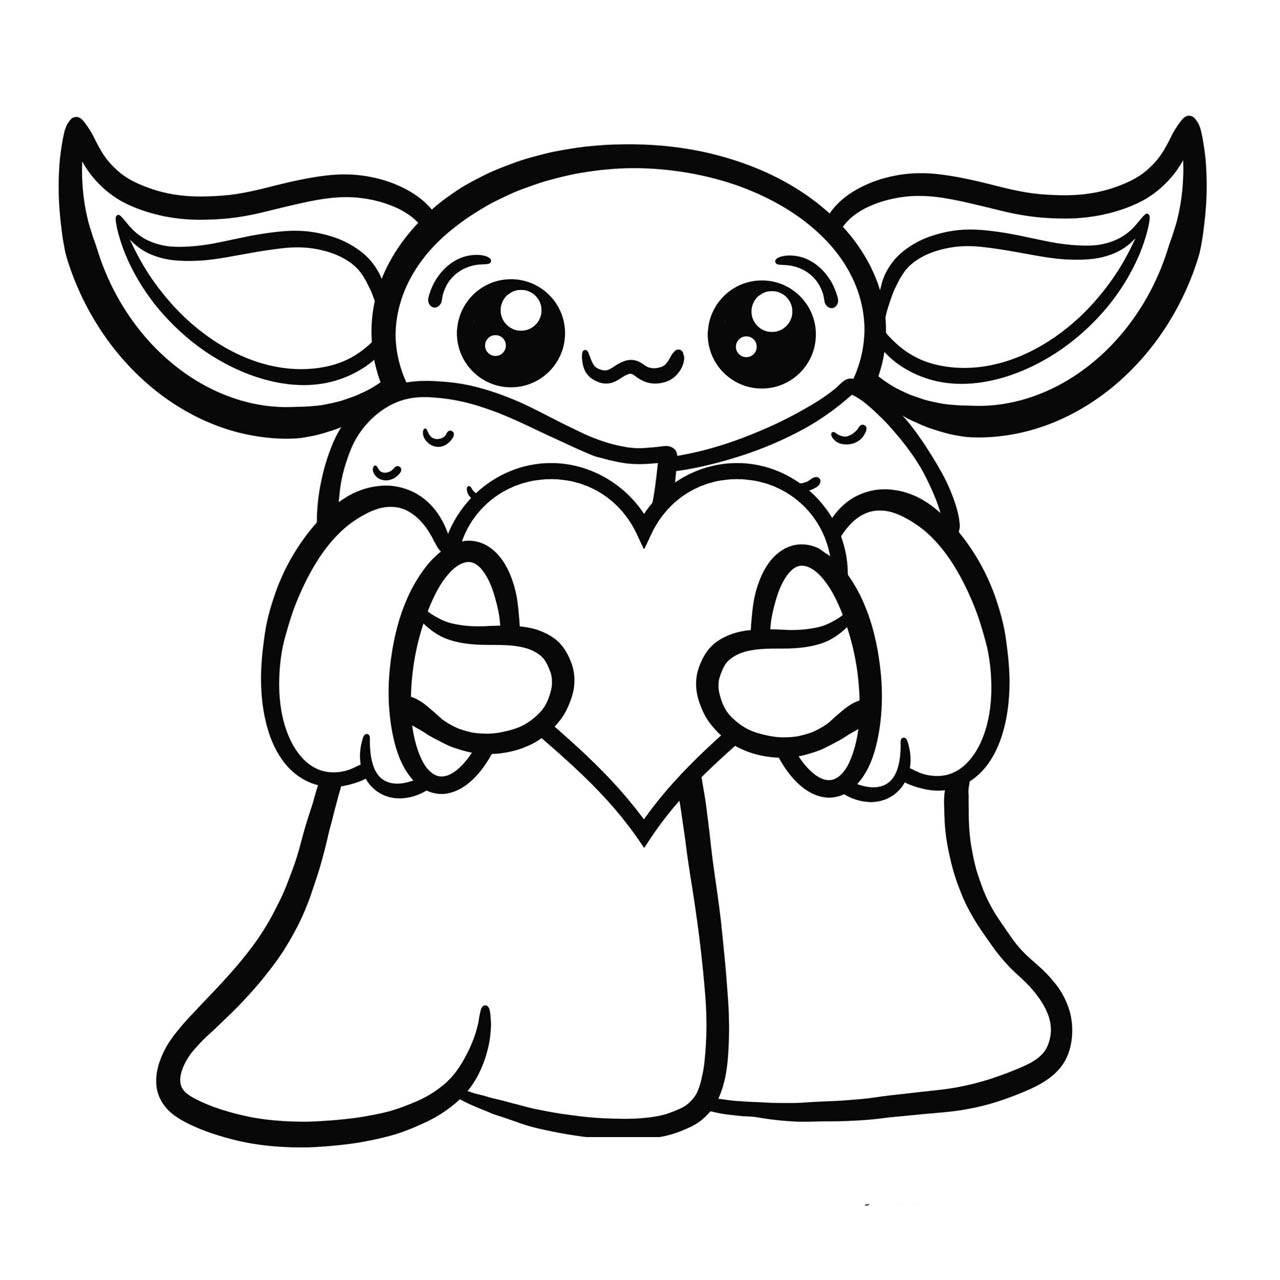 Cute Baby Yoda Coloring Pages to Print